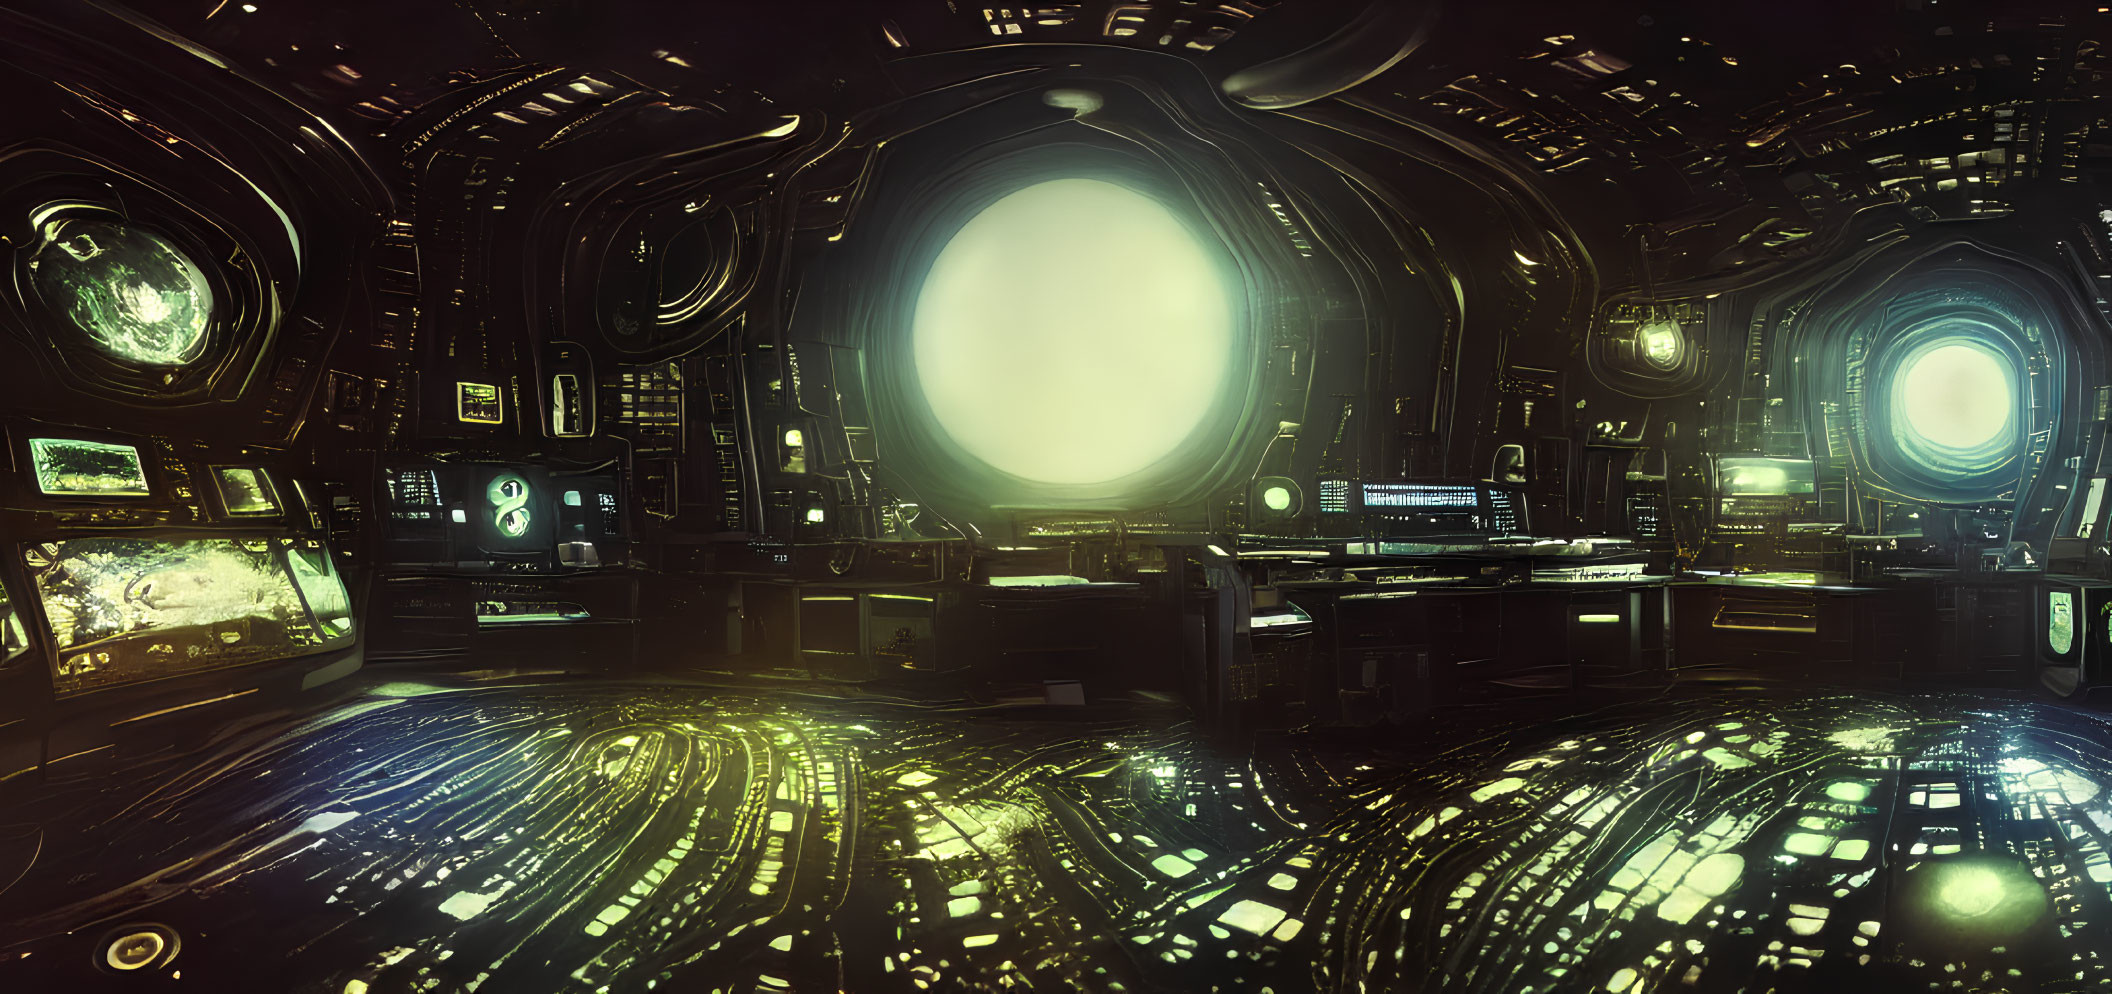 Futuristic spaceship interior with glowing control panels and holographic display